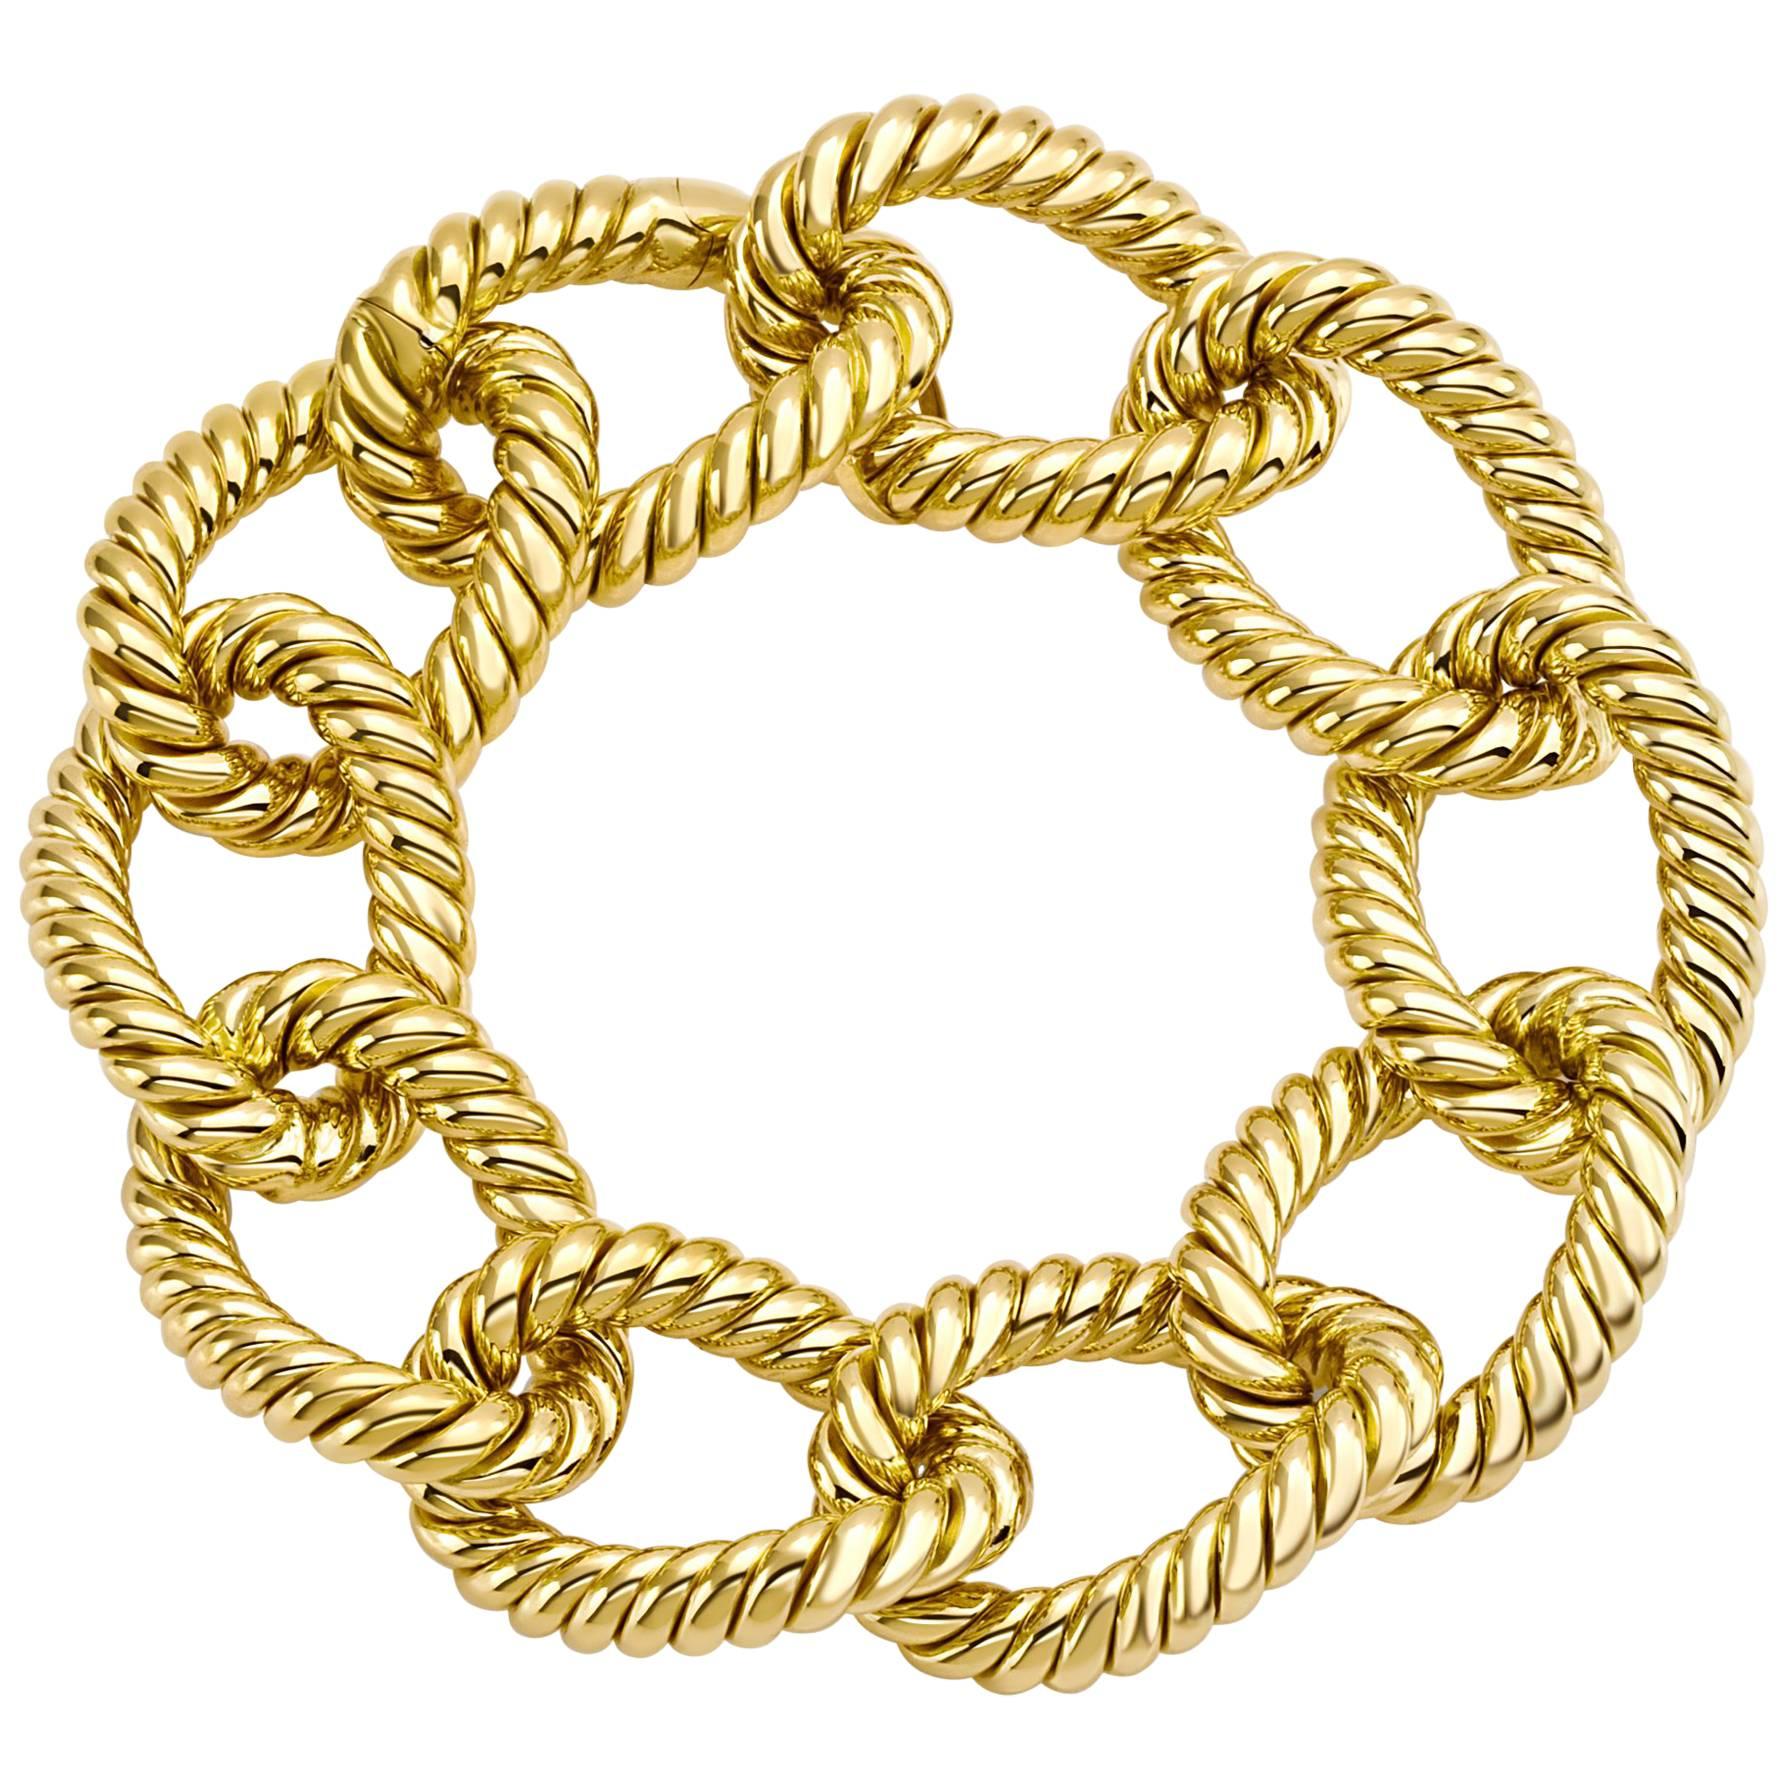 Bracelet from the Collection "Rope" 18 Karat Yellow Gold For Sale